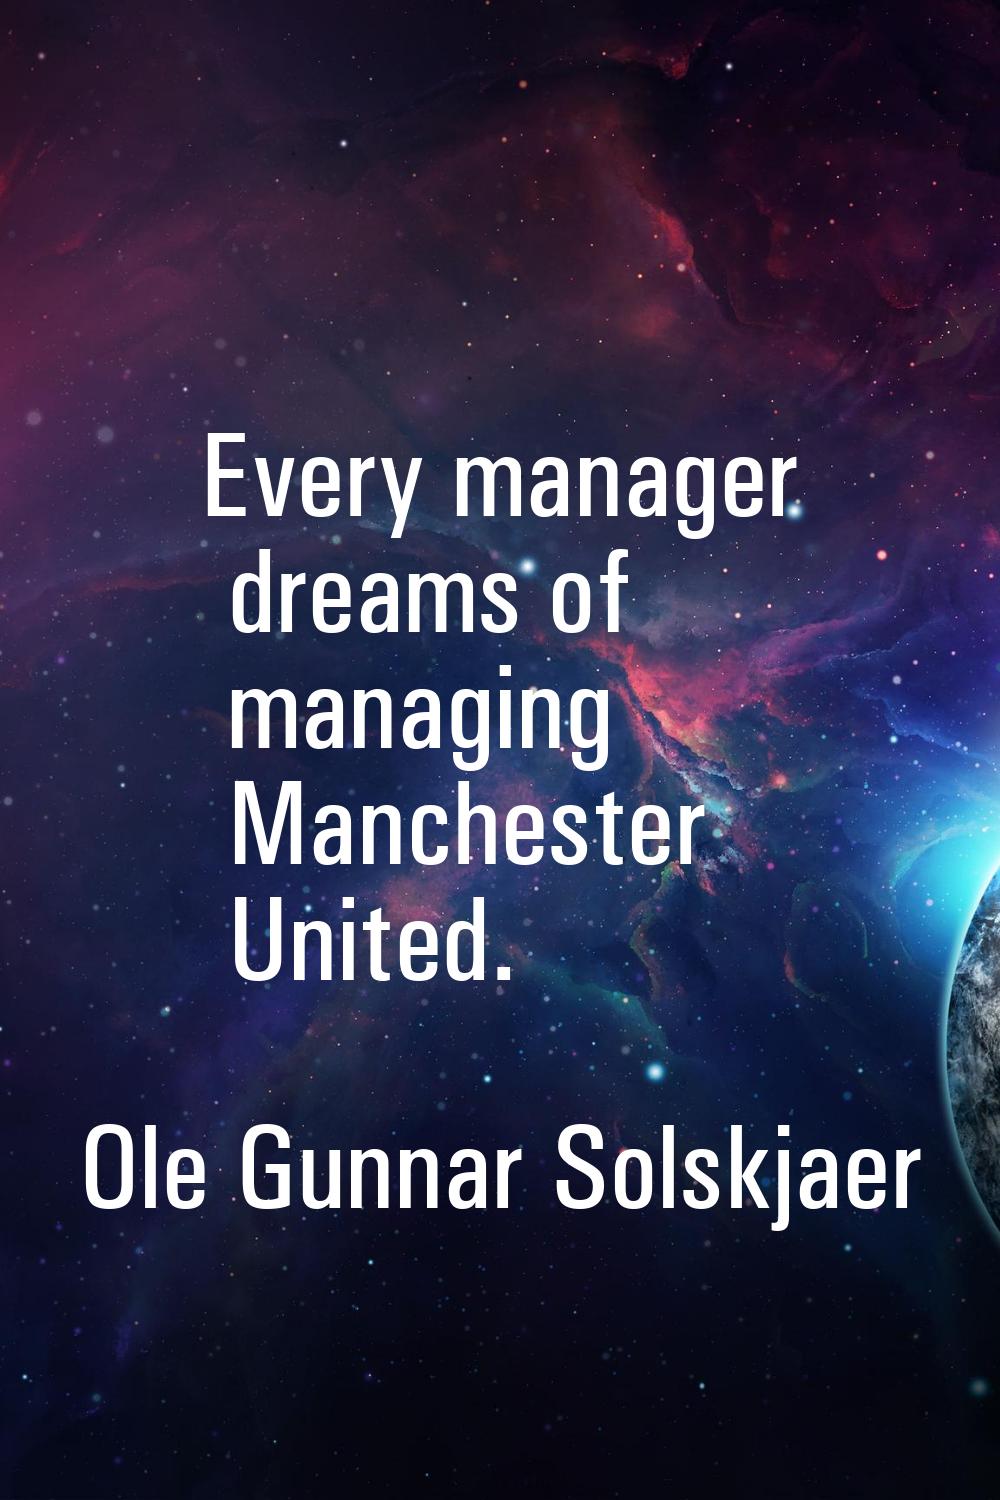 Every manager dreams of managing Manchester United.